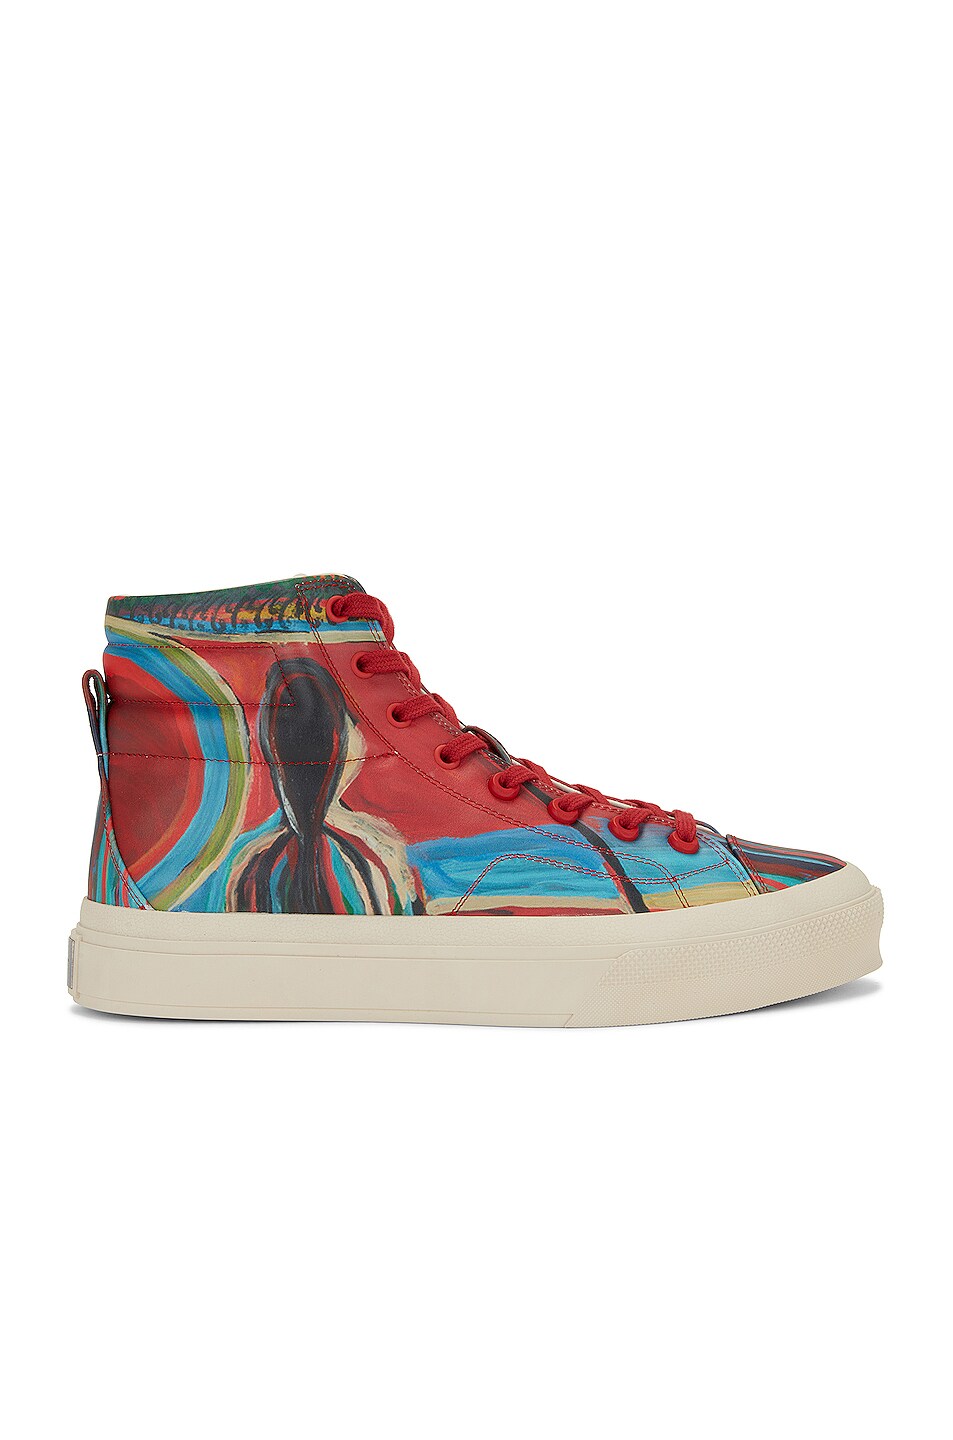 Image 1 of Givenchy City High Top Sneaker in Multicolored